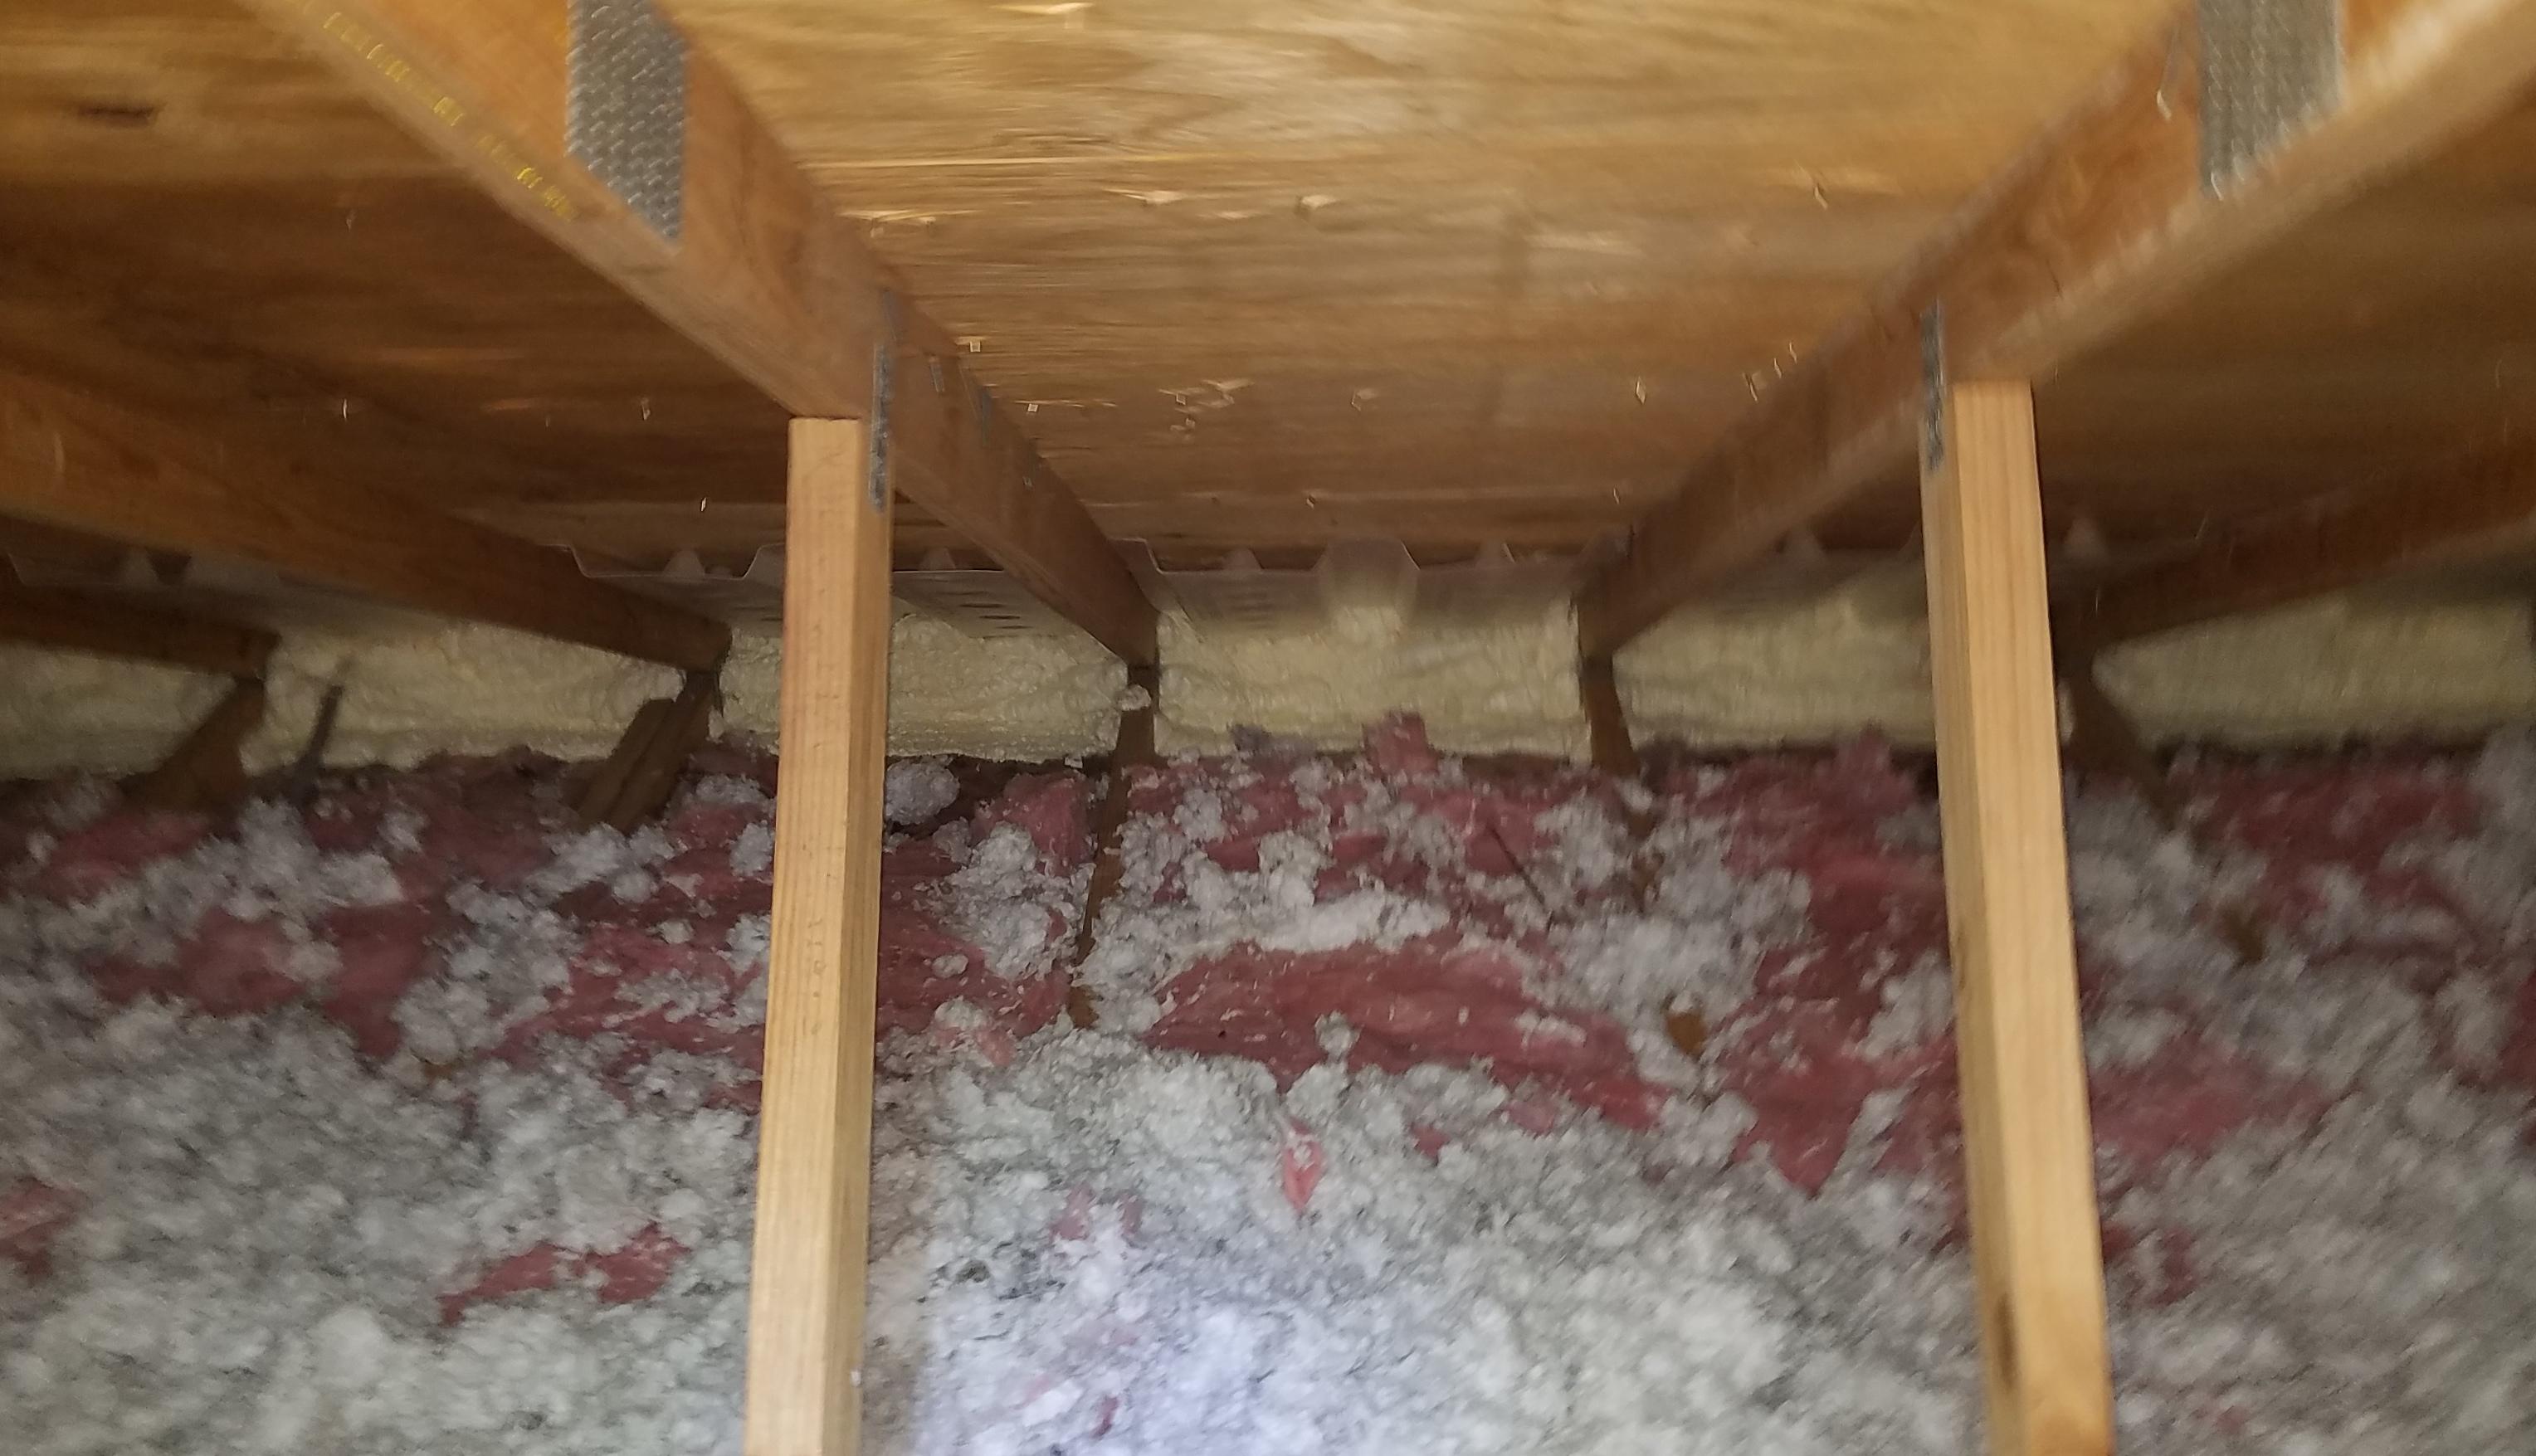 Air Sealing Work Done In Attic